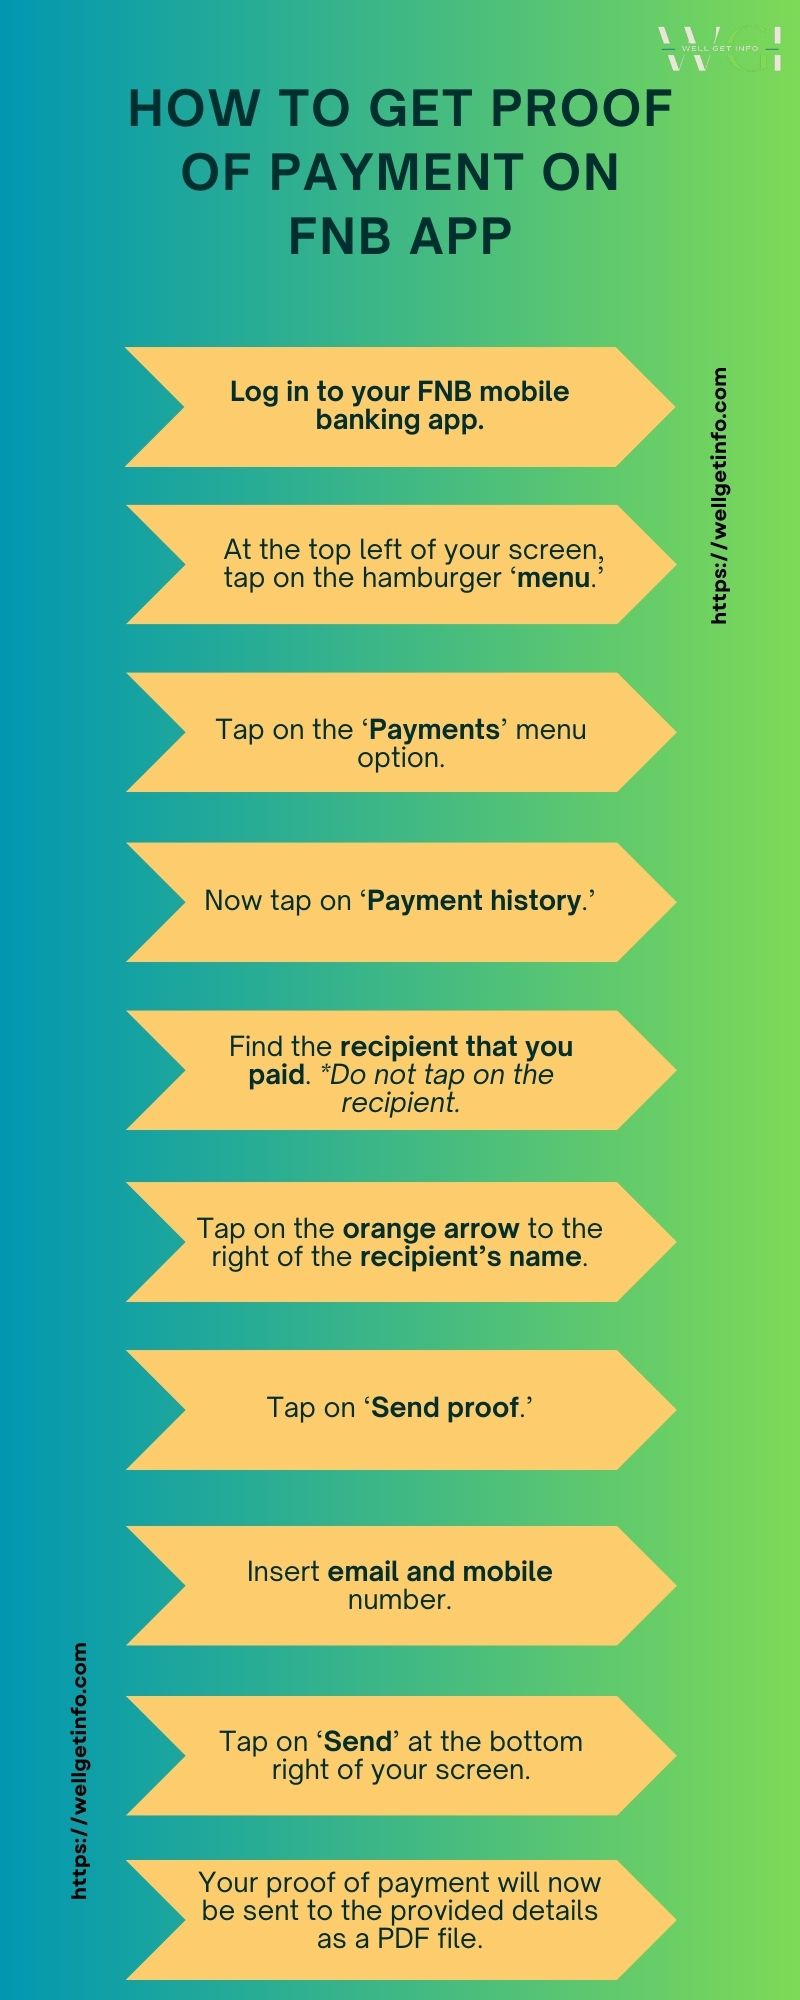 How to Get Payment Proof on FNB App